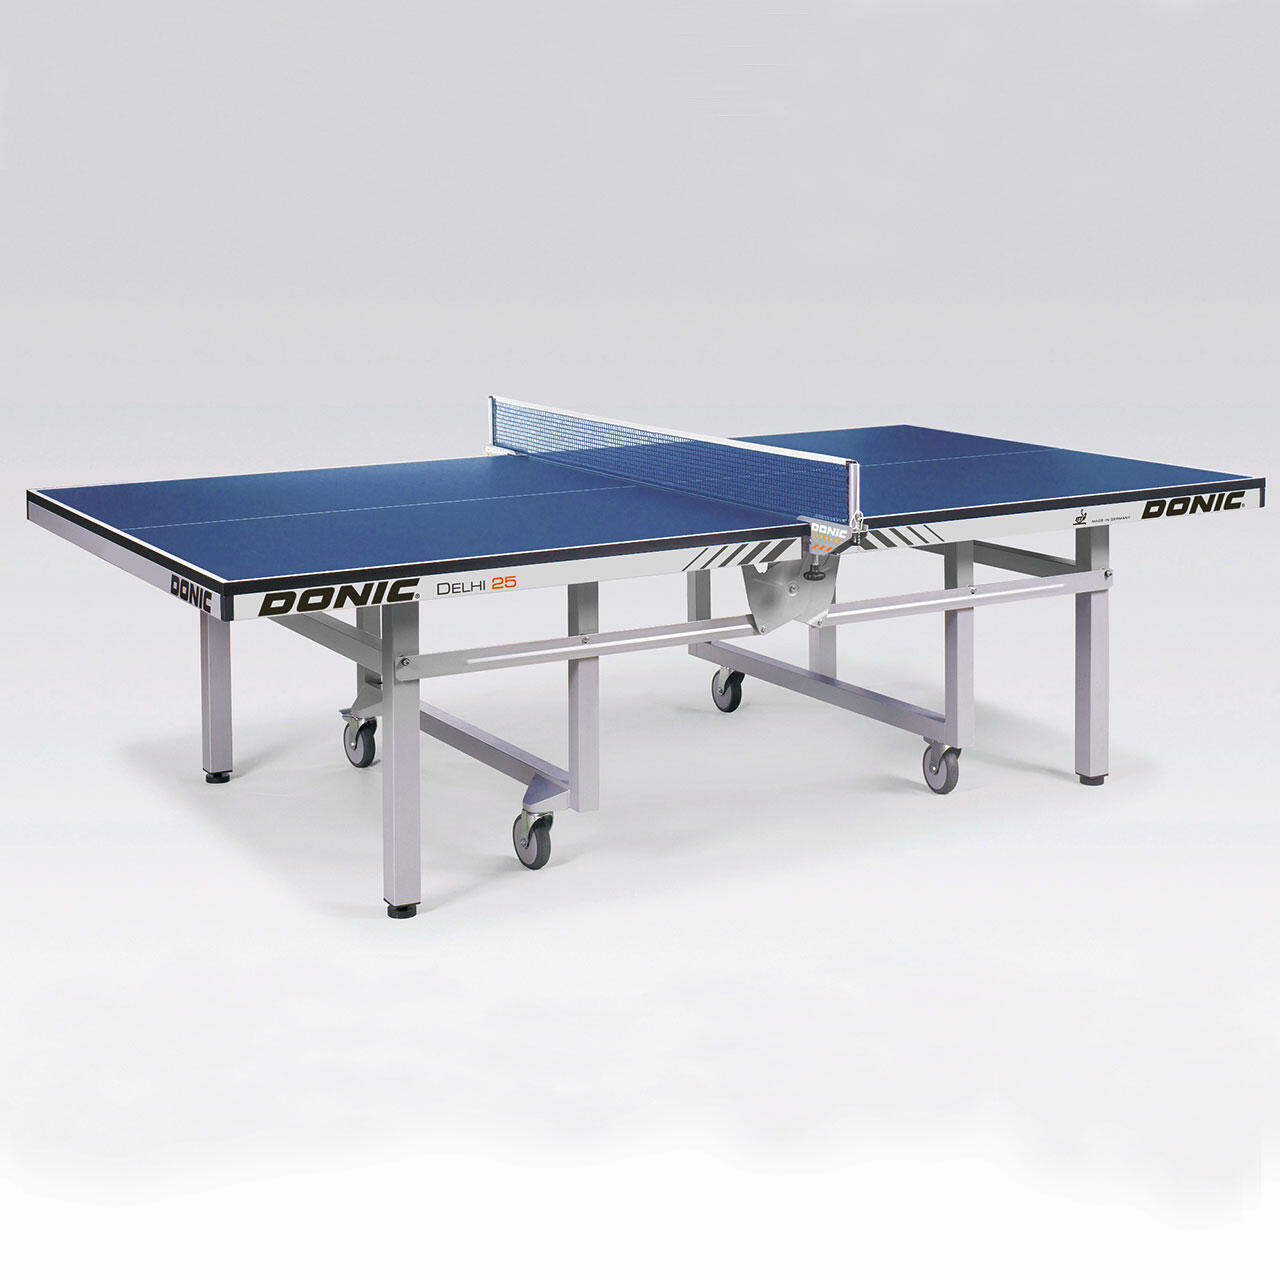 Donic Delhi 25 ITTF Approved Blue Table Tennis Table 1/3